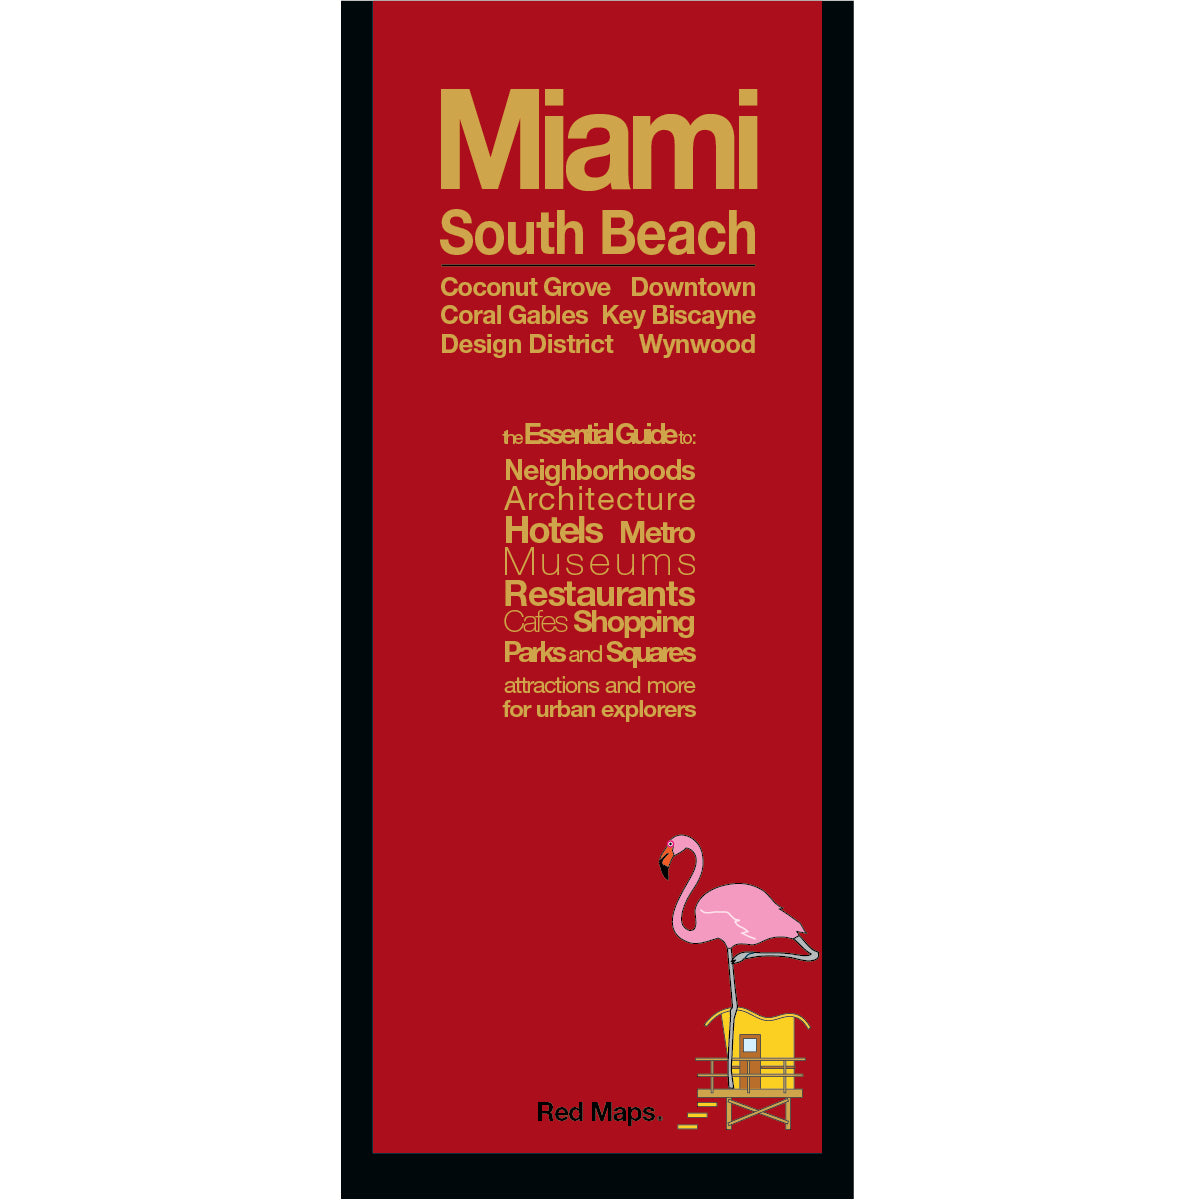 Miami South Beach foldout map with a red colored cover.